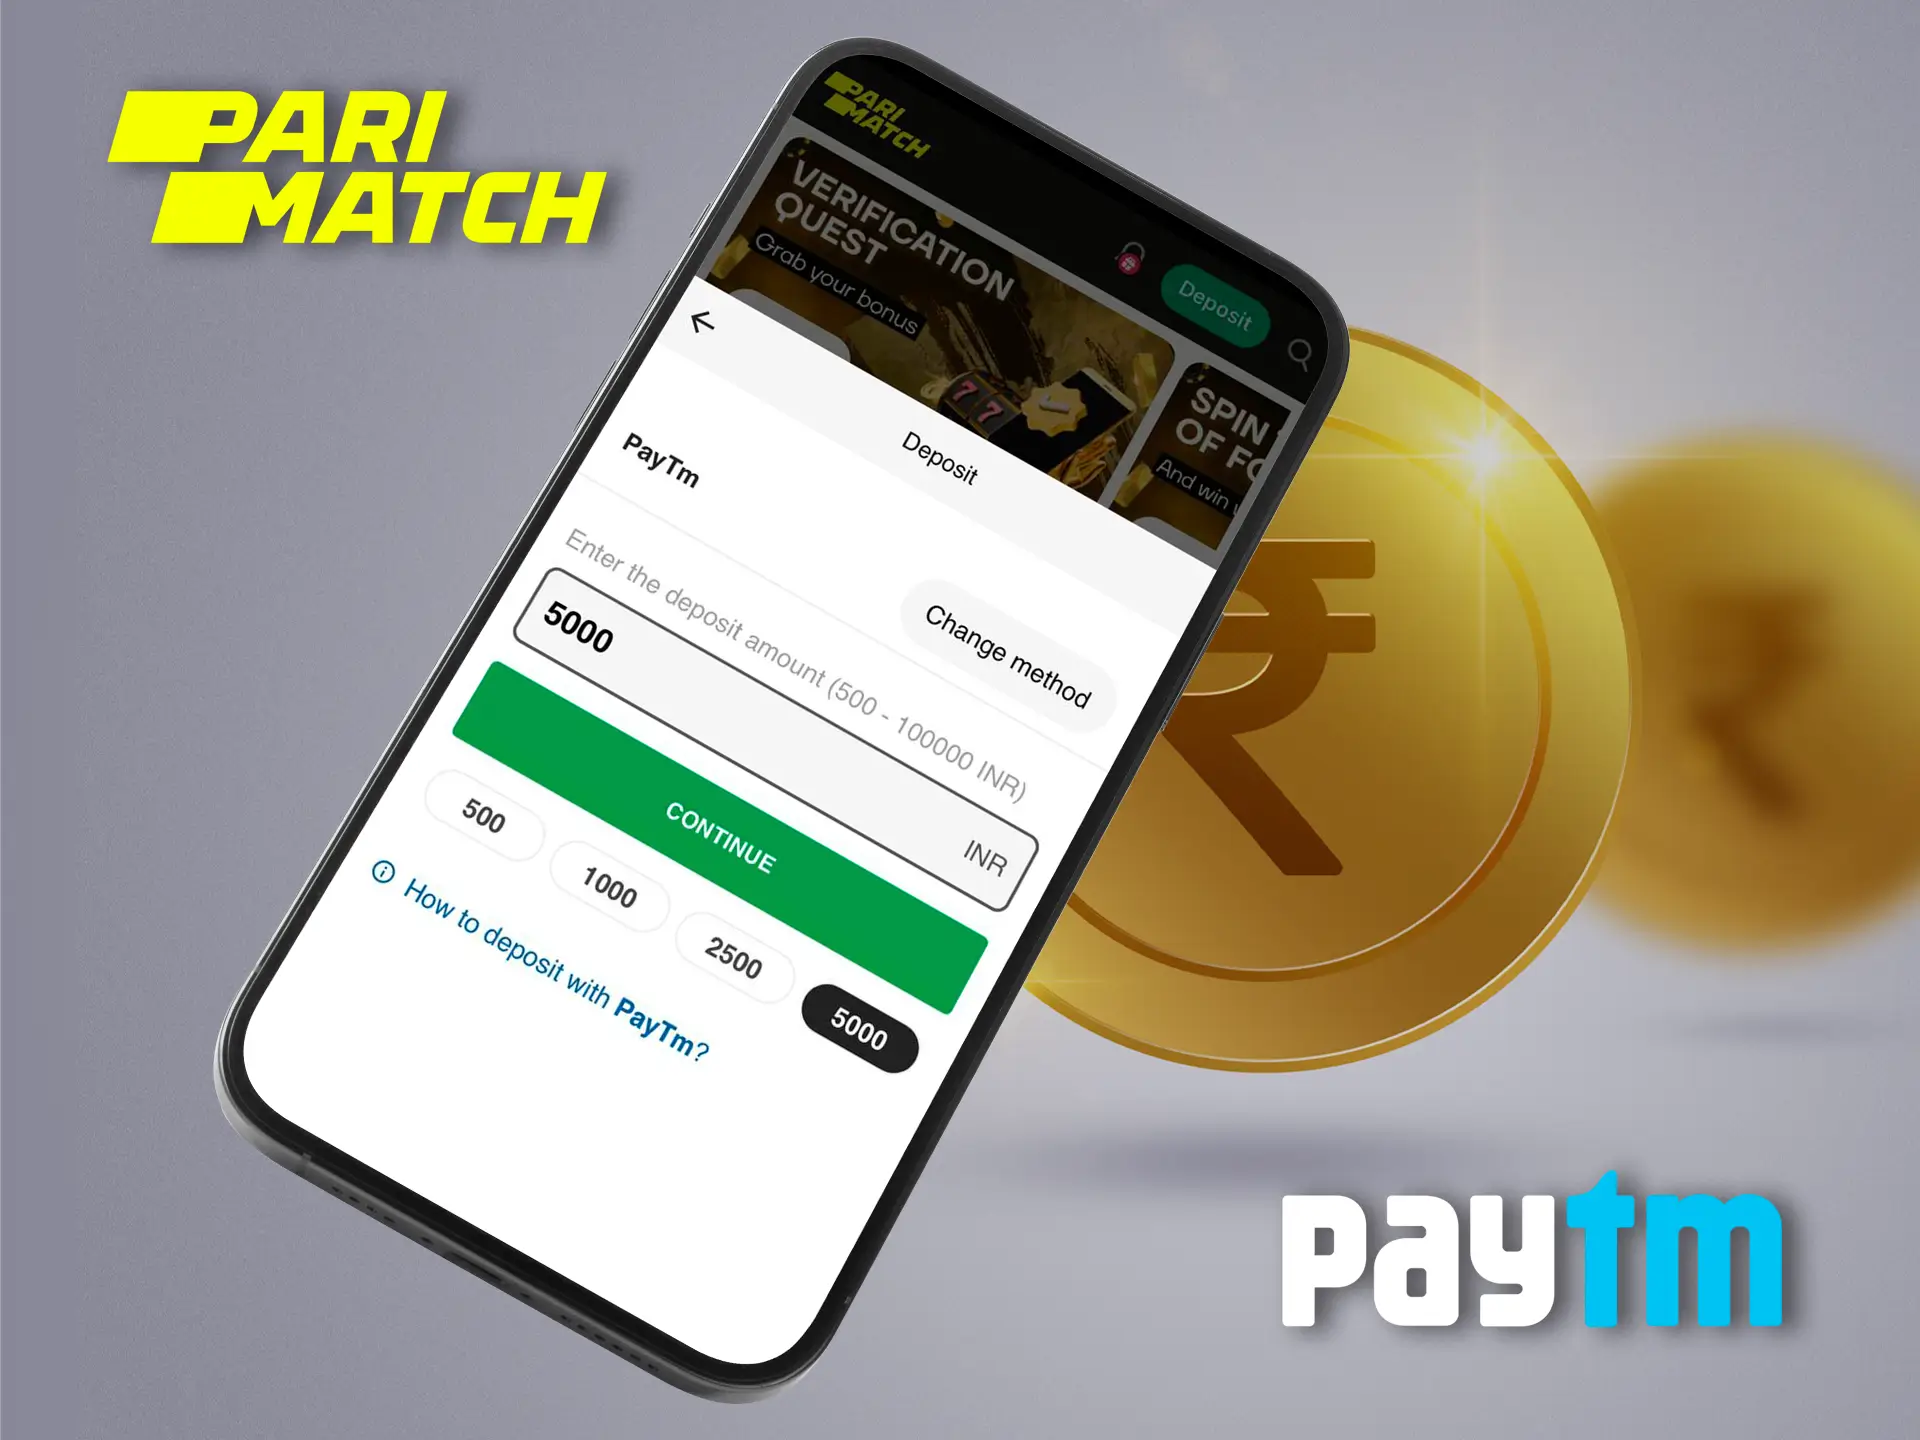 Use the most common PayTm top-up system at Parimatch Casino.